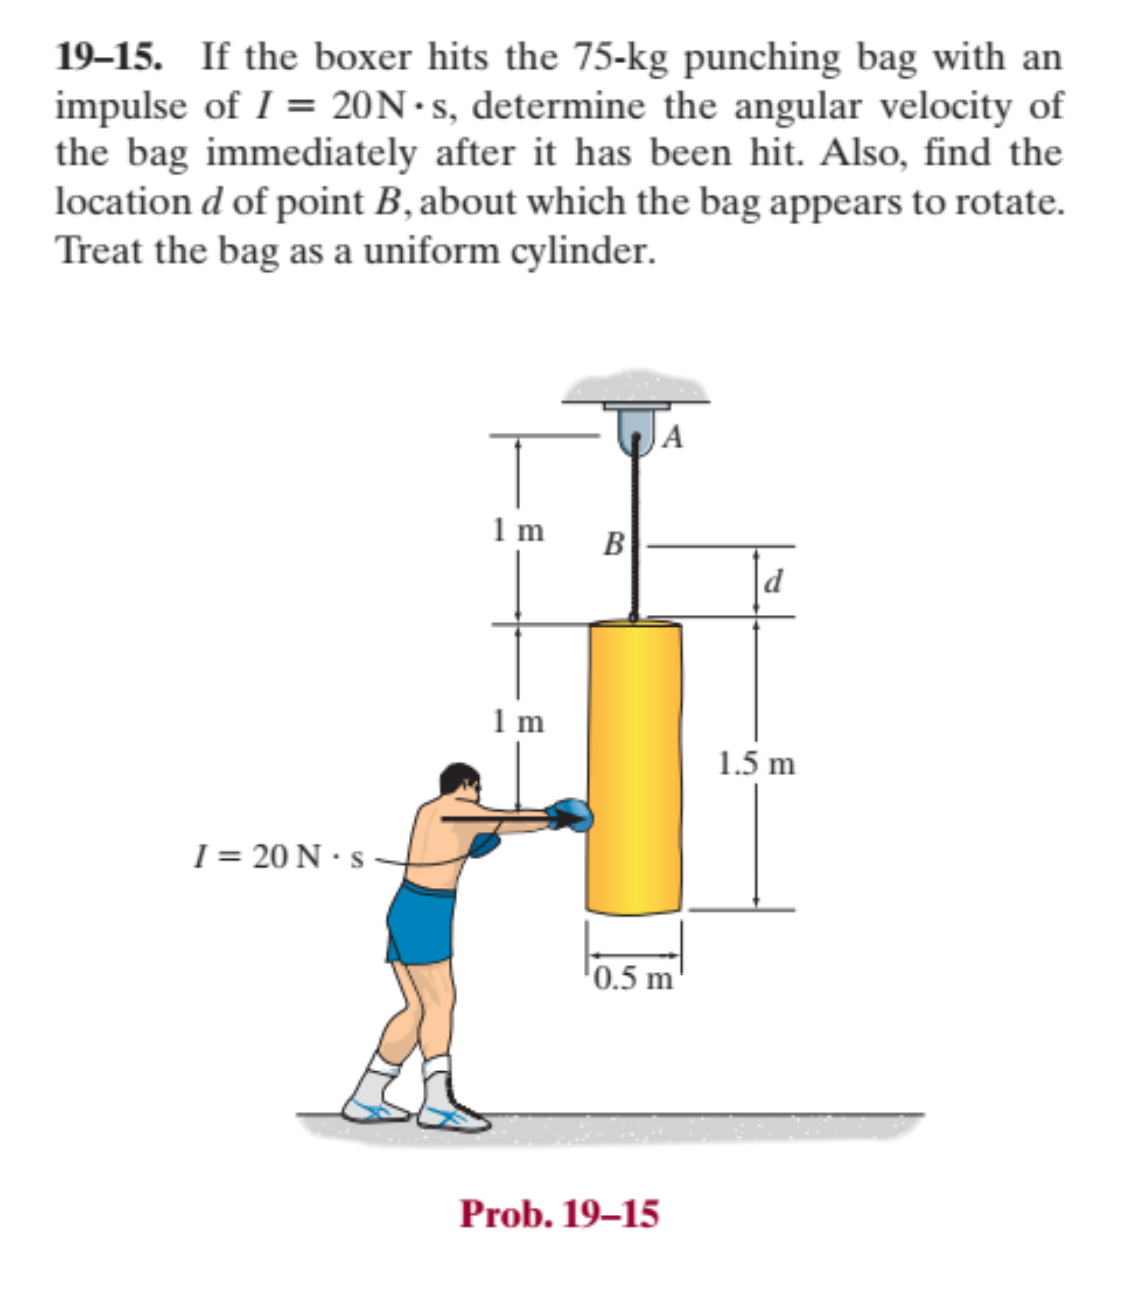 19-15. If the boxer hits the 75-kg punching bag with an
impulse of I = 20N-s, determine the angular velocity of
the bag immediately after it has been hit. Also, find the
location d of point B, about which the bag appears to rotate.
Treat the bag as a uniform cylinder.
I = 20 N. S
1 m
1 m
B
A
¹0.5 m
Prob. 19-15
1.5 m